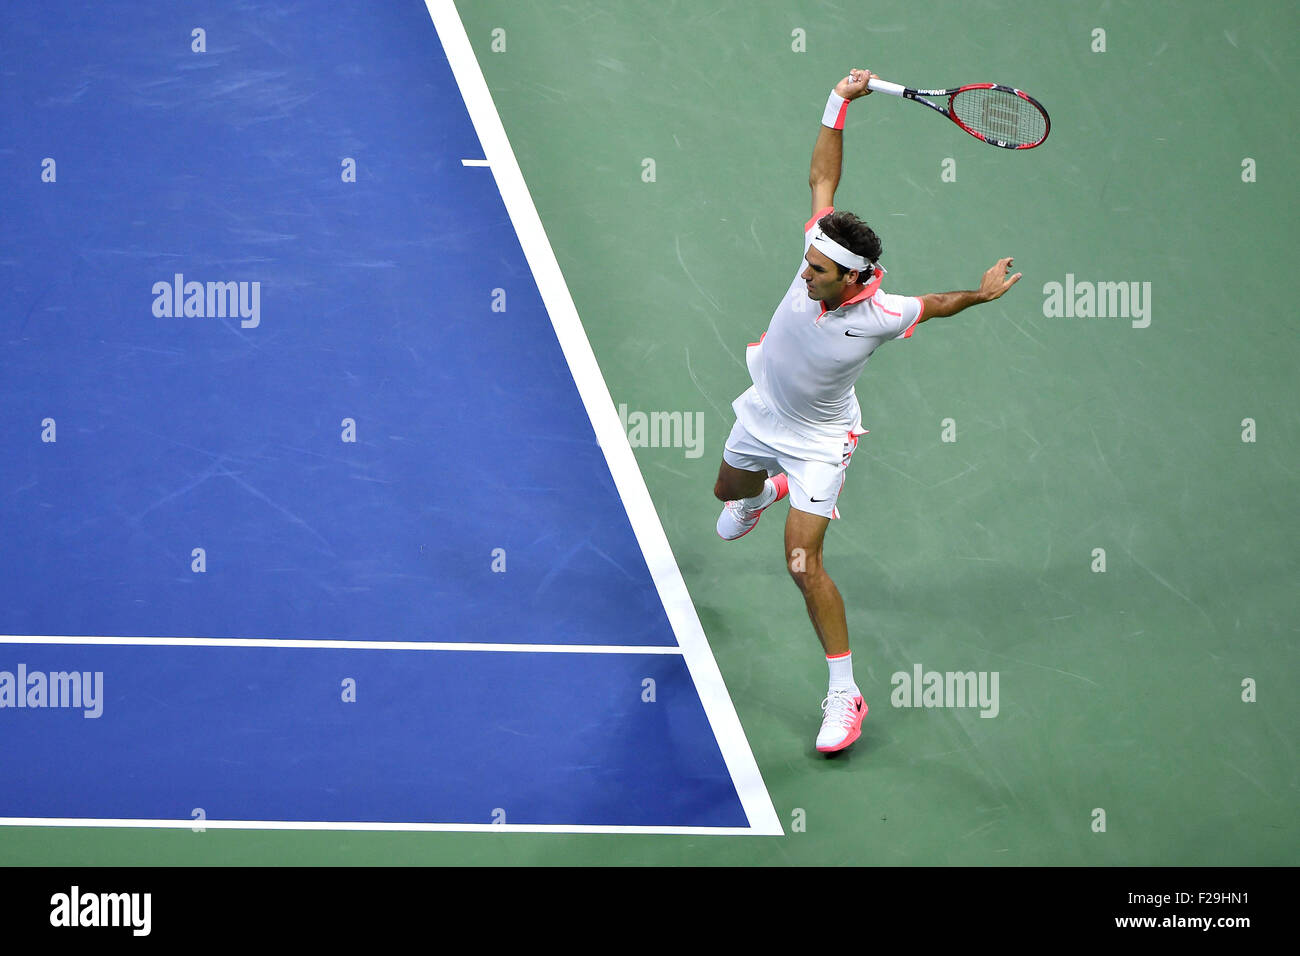 Flushing Meadows, New York, USA. 13th Sep, 2015. Men's singles title at the 2015 US Open, played at the Billie Jean King Tennis Center, Flushing Meadow NY. Roger Federer (SUI) © Action Plus Sports/Alamy Live News Stock Photo